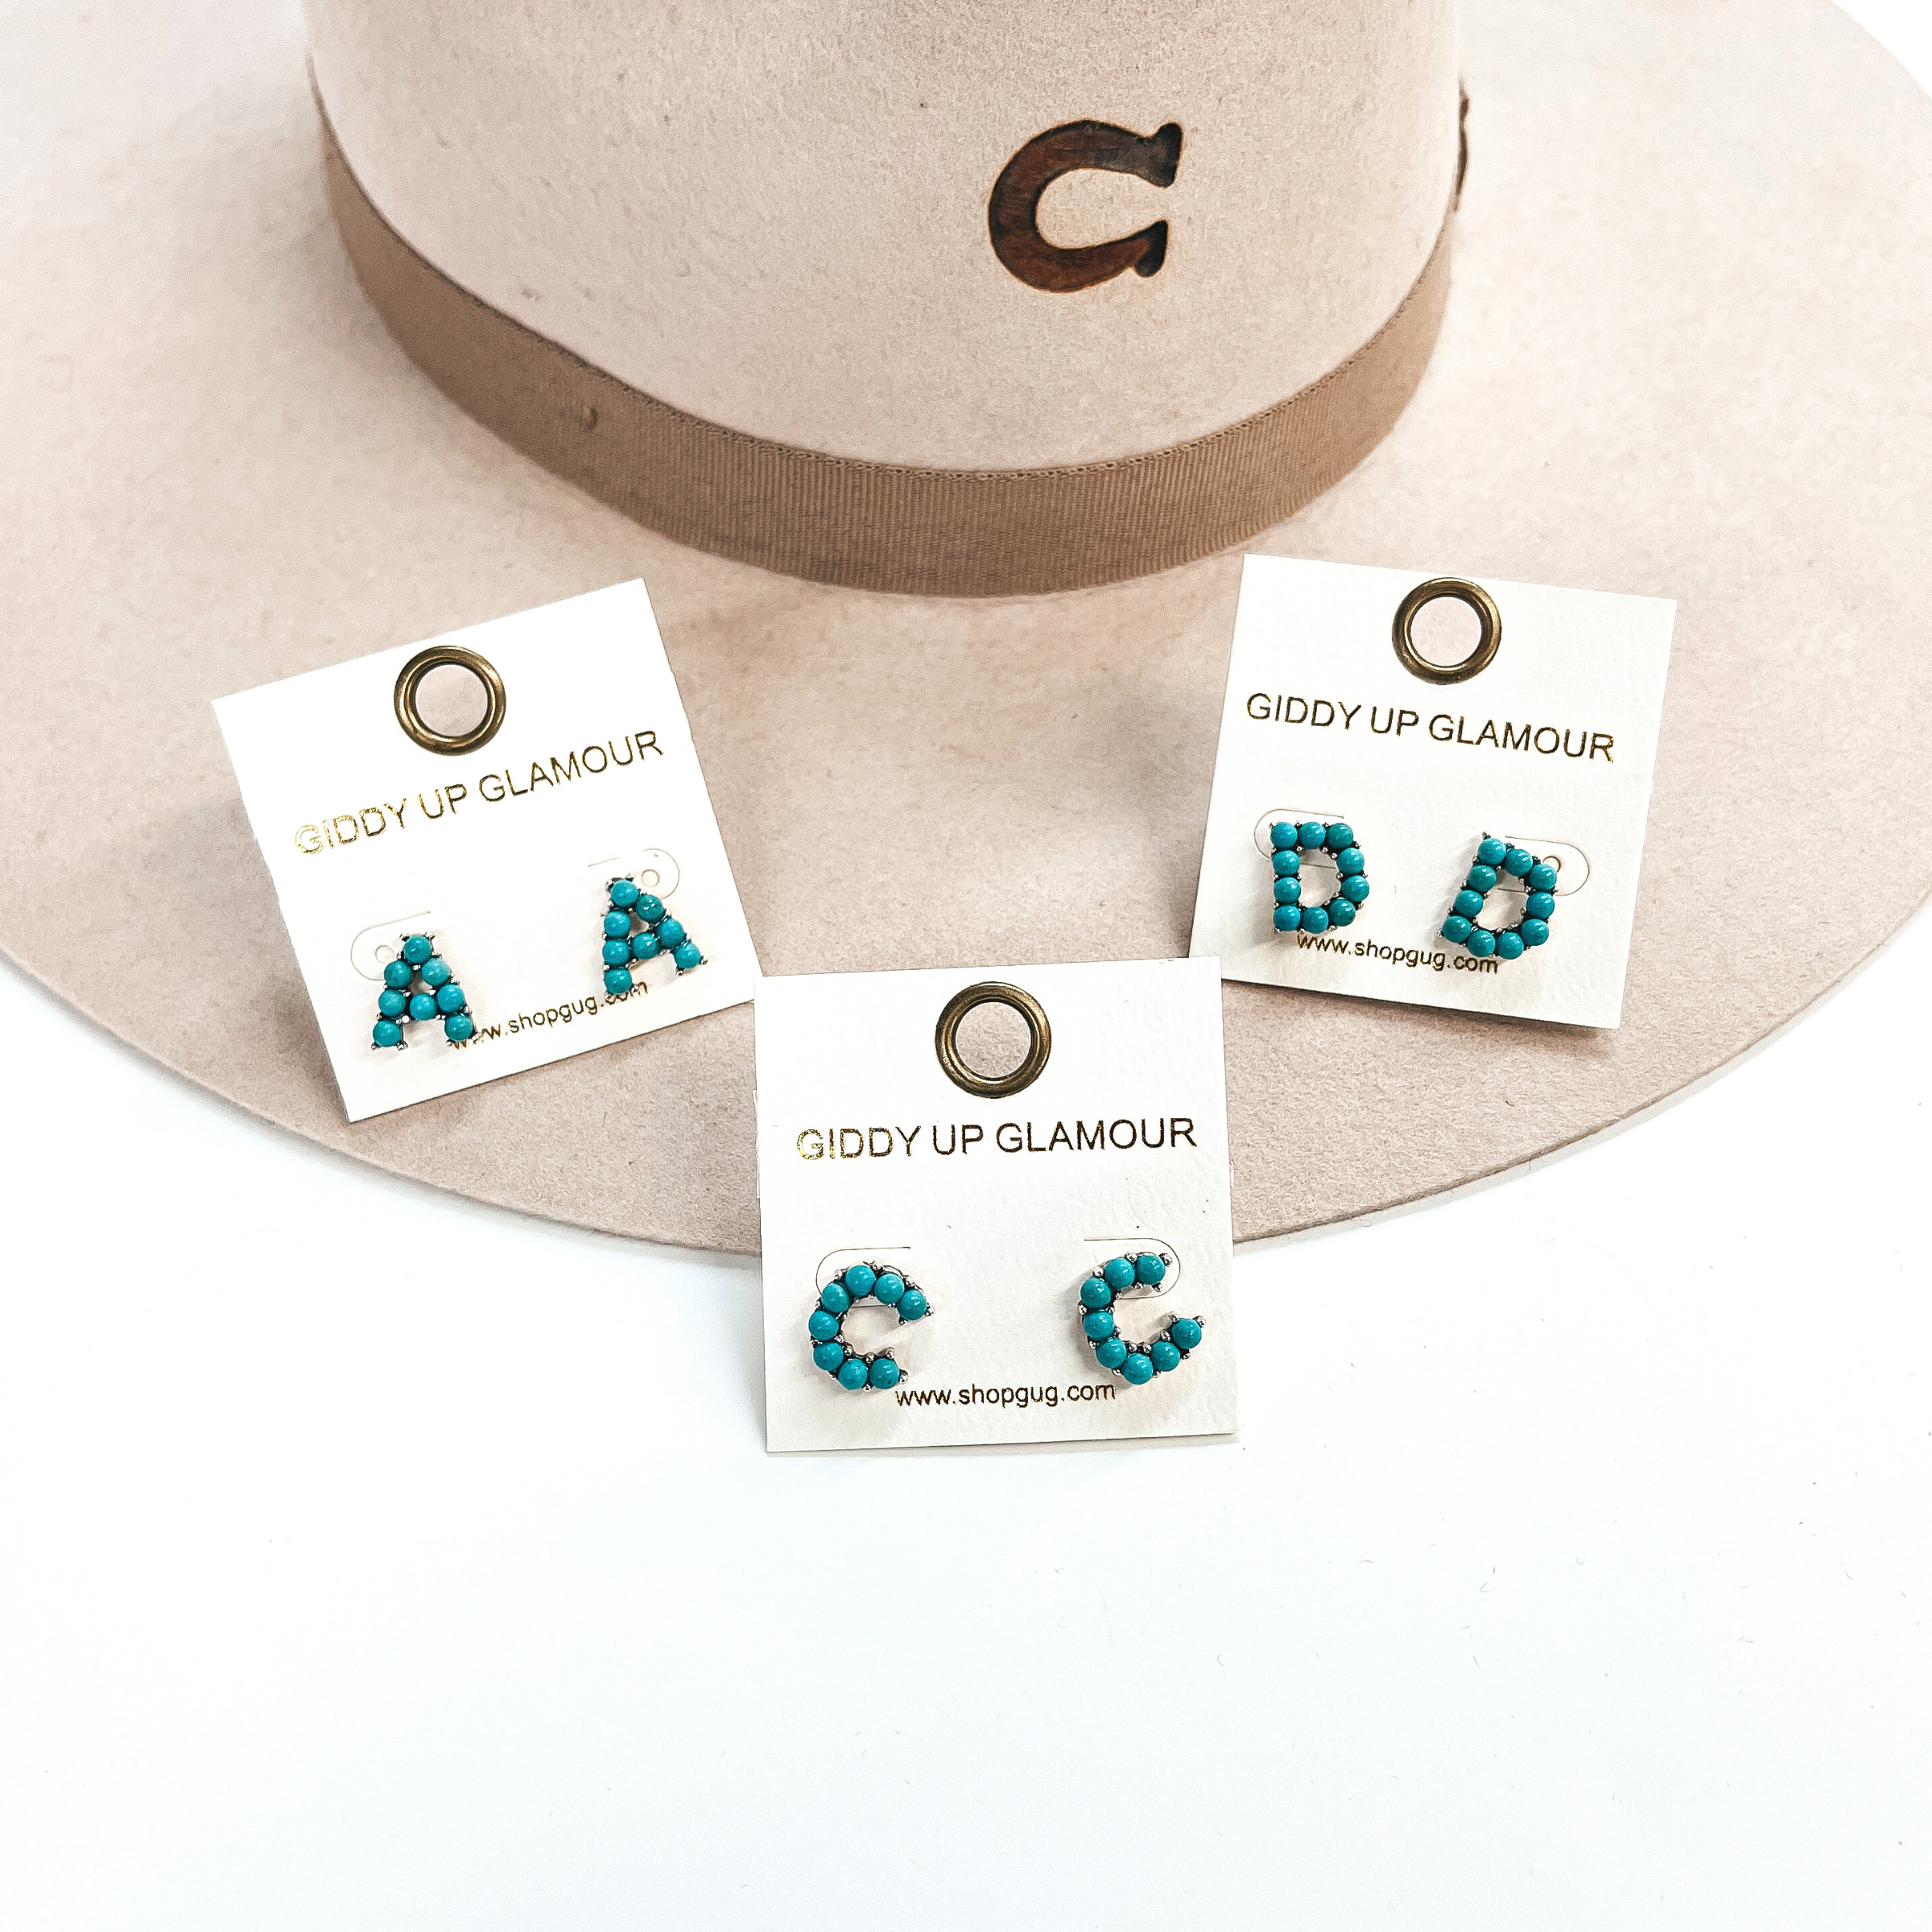 These are three pair of initial earrings with small turquoise stones in  a silver setting. From left to right; A,C,D. These earrings are placed  on a white Giddy Up Glamour card, they are laying on a beige, felt,  Charlie 1 Horse hat and on a white background.